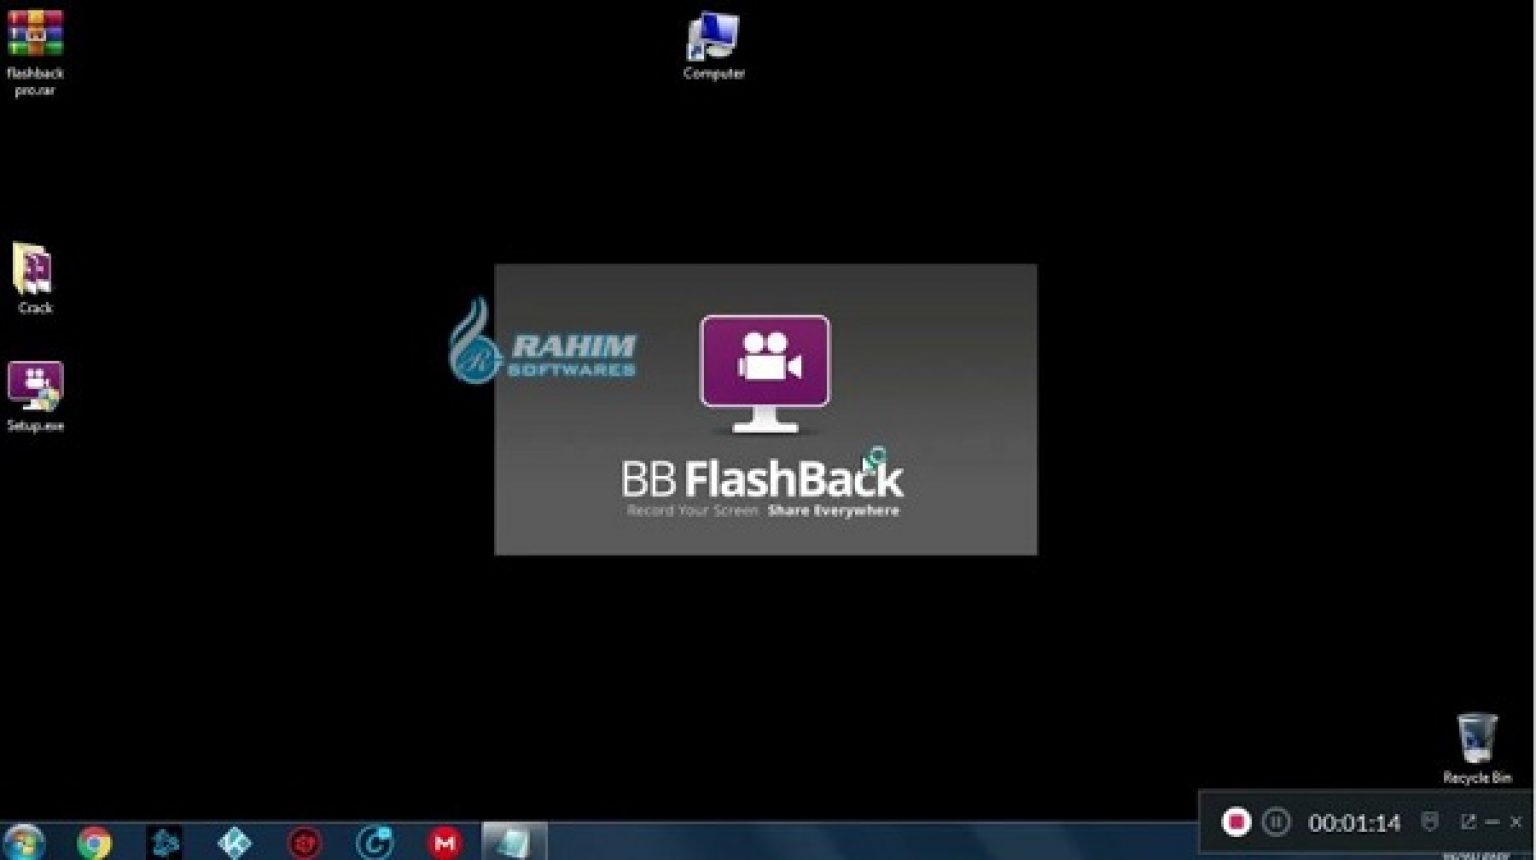 download the last version for ios BB FlashBack Pro 5.60.0.4813